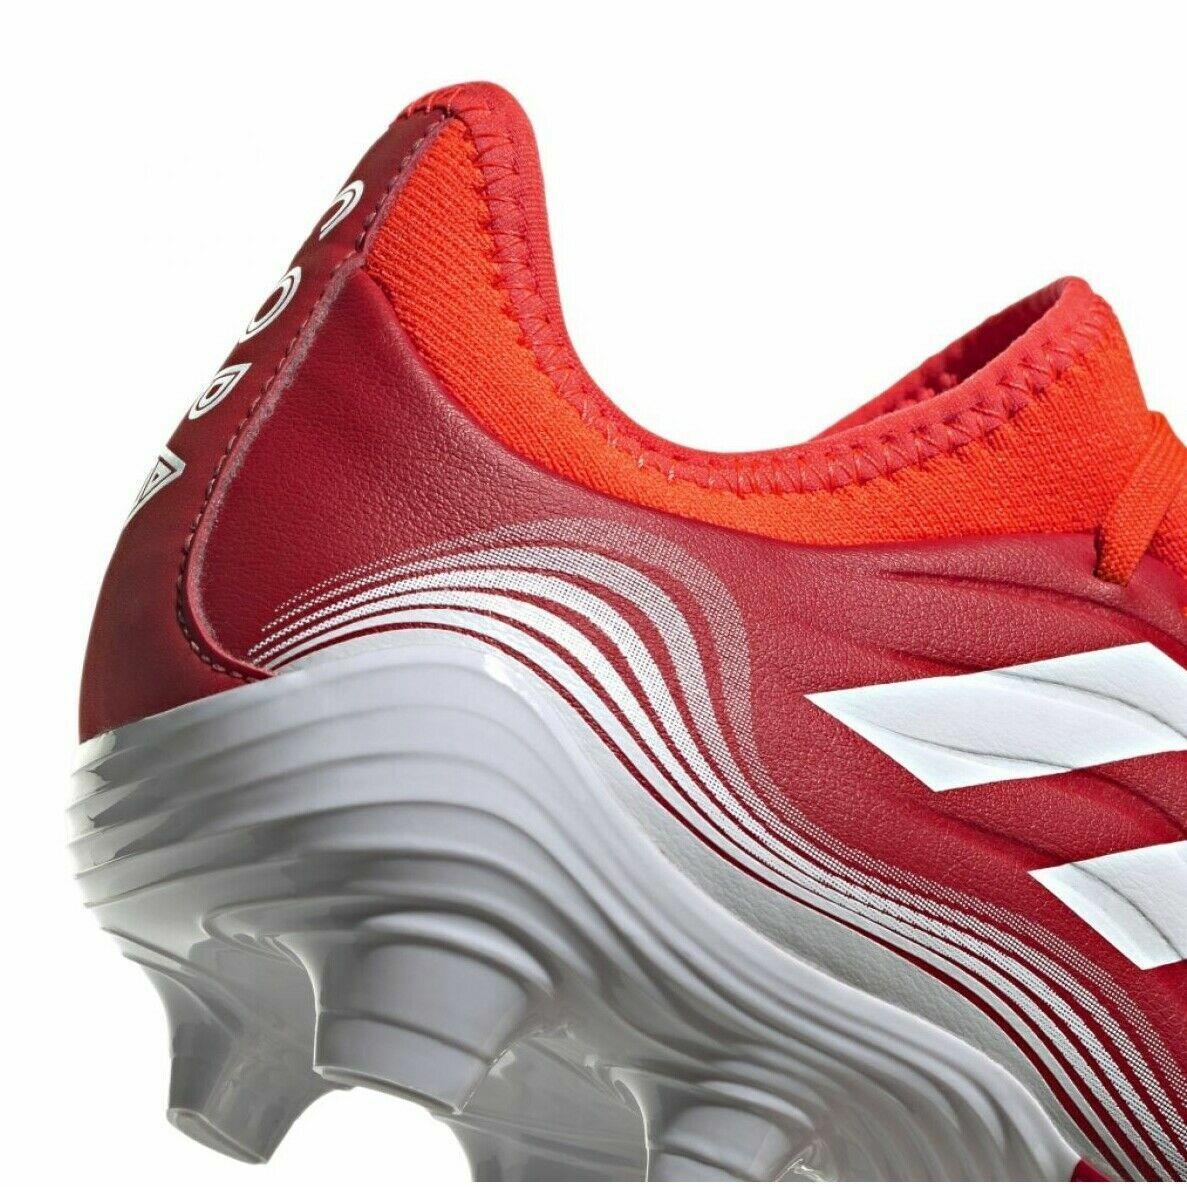 Adidas shoes Copa - Multicolor , Red Dominant 0